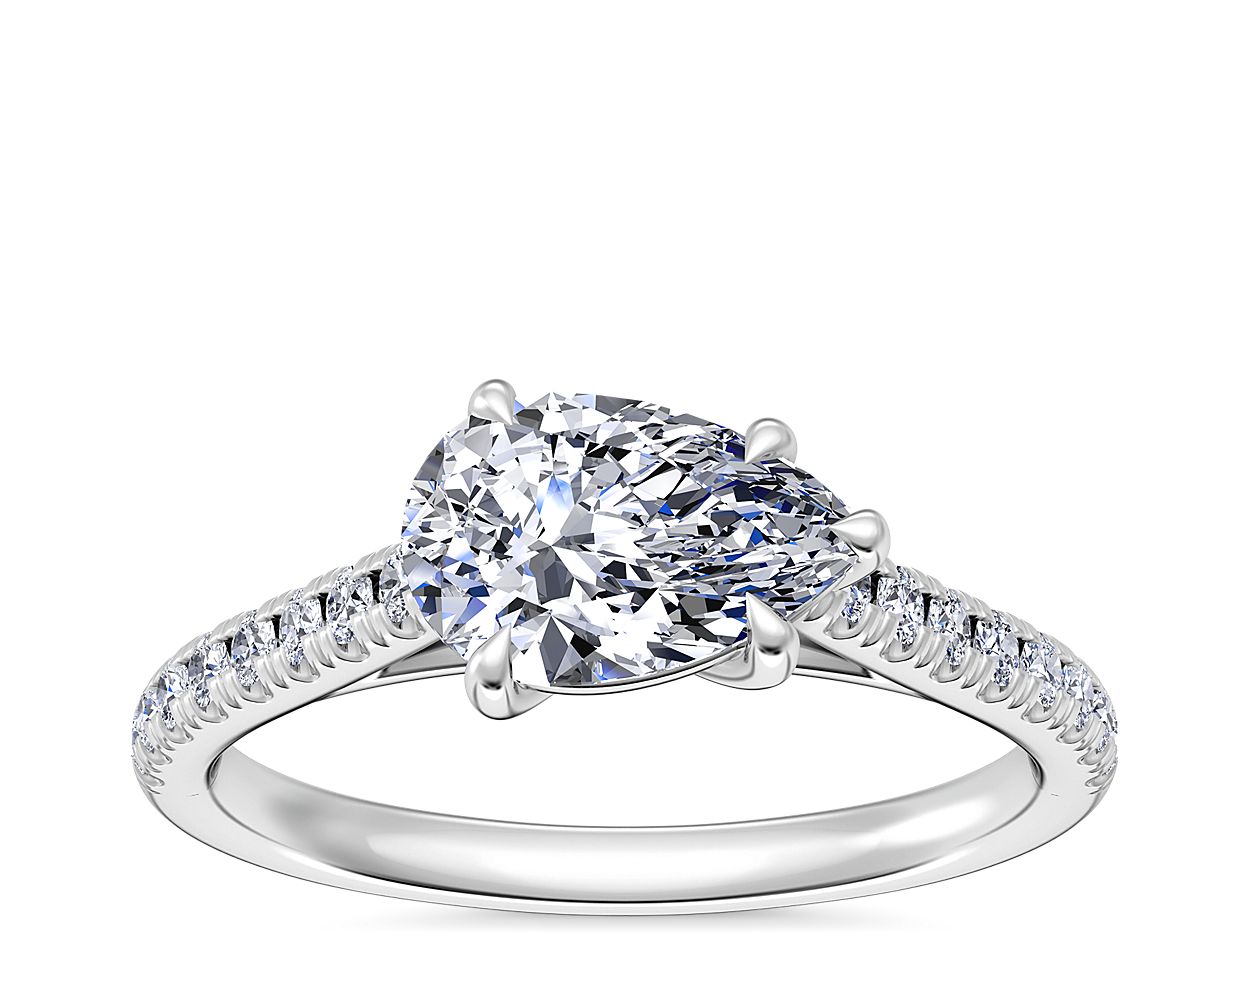 East West Diamond Engagement Ring in 14k White Gold